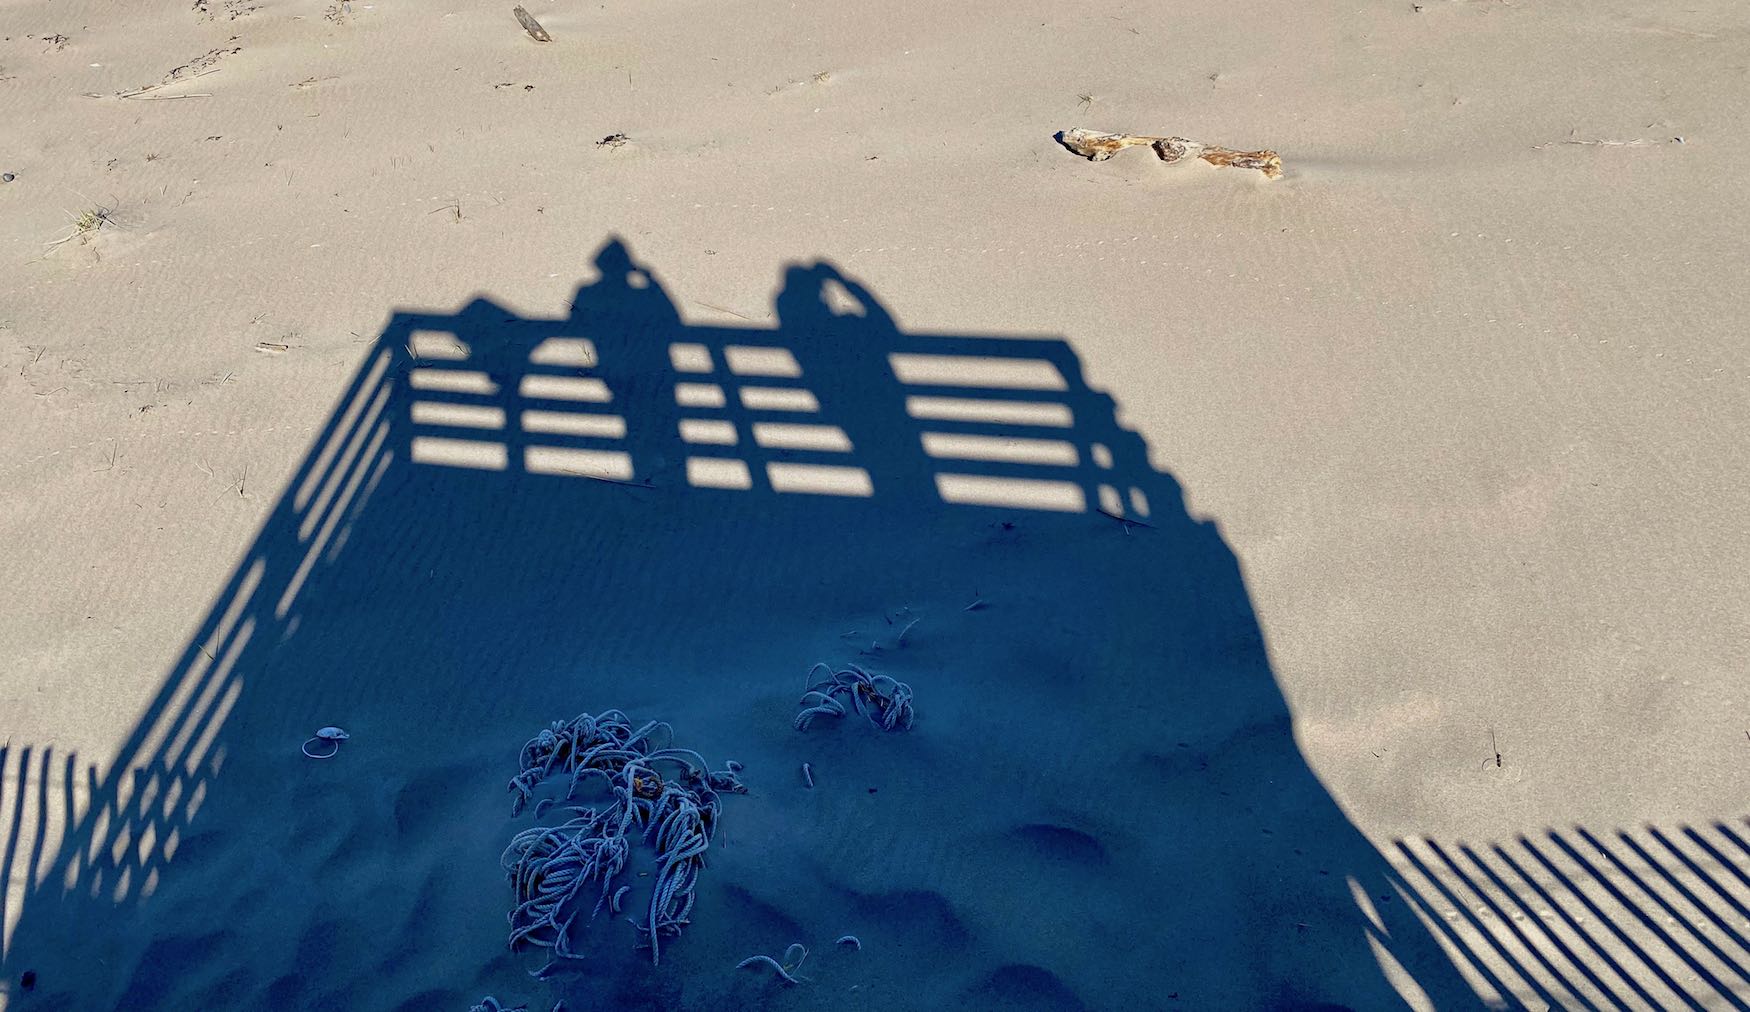 It's the weekend! Number 292, Our Shadows on the Beach at Plum Island, MA